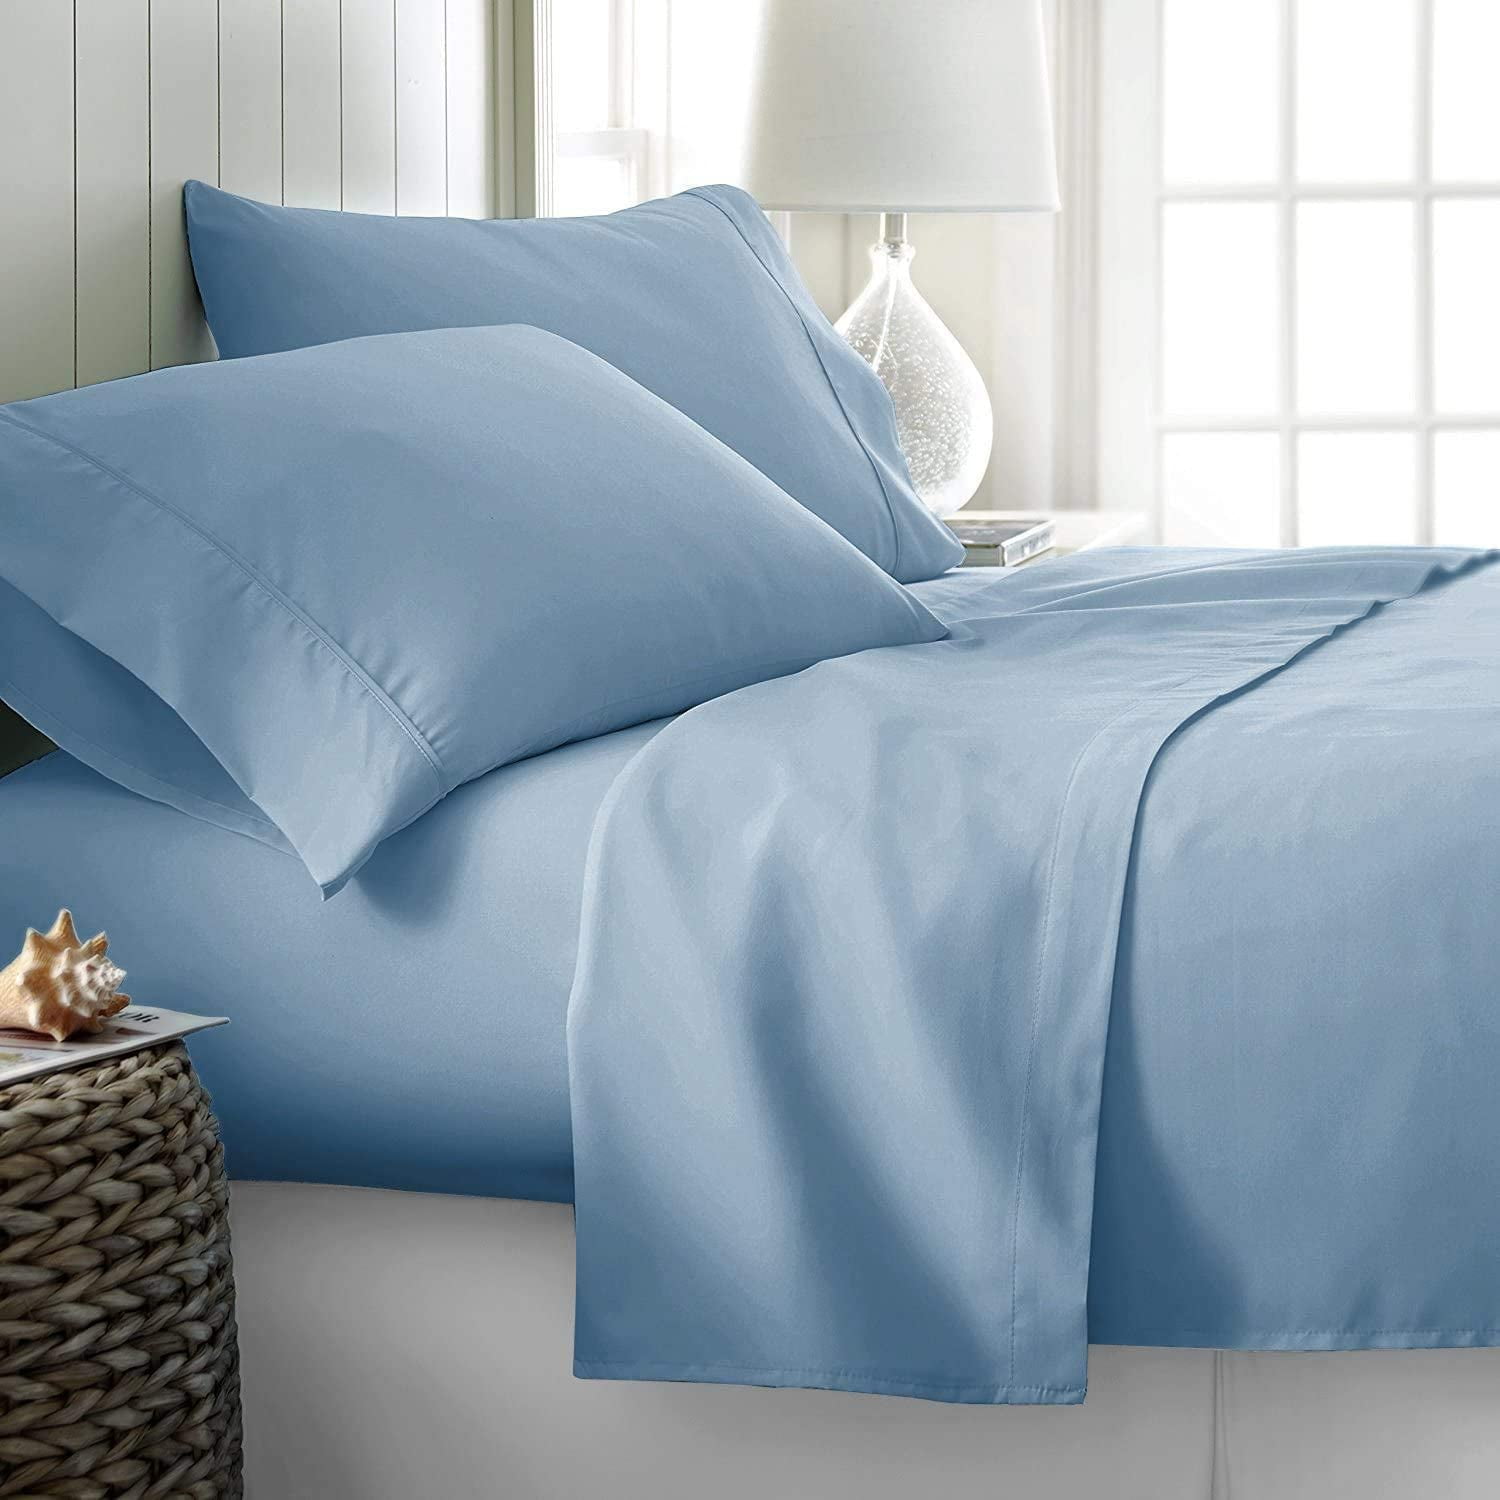 Queen Sky Blue Solid 4 Pc Bed Sheet Set 1000 Thread Count 100% Egyption Cotton 